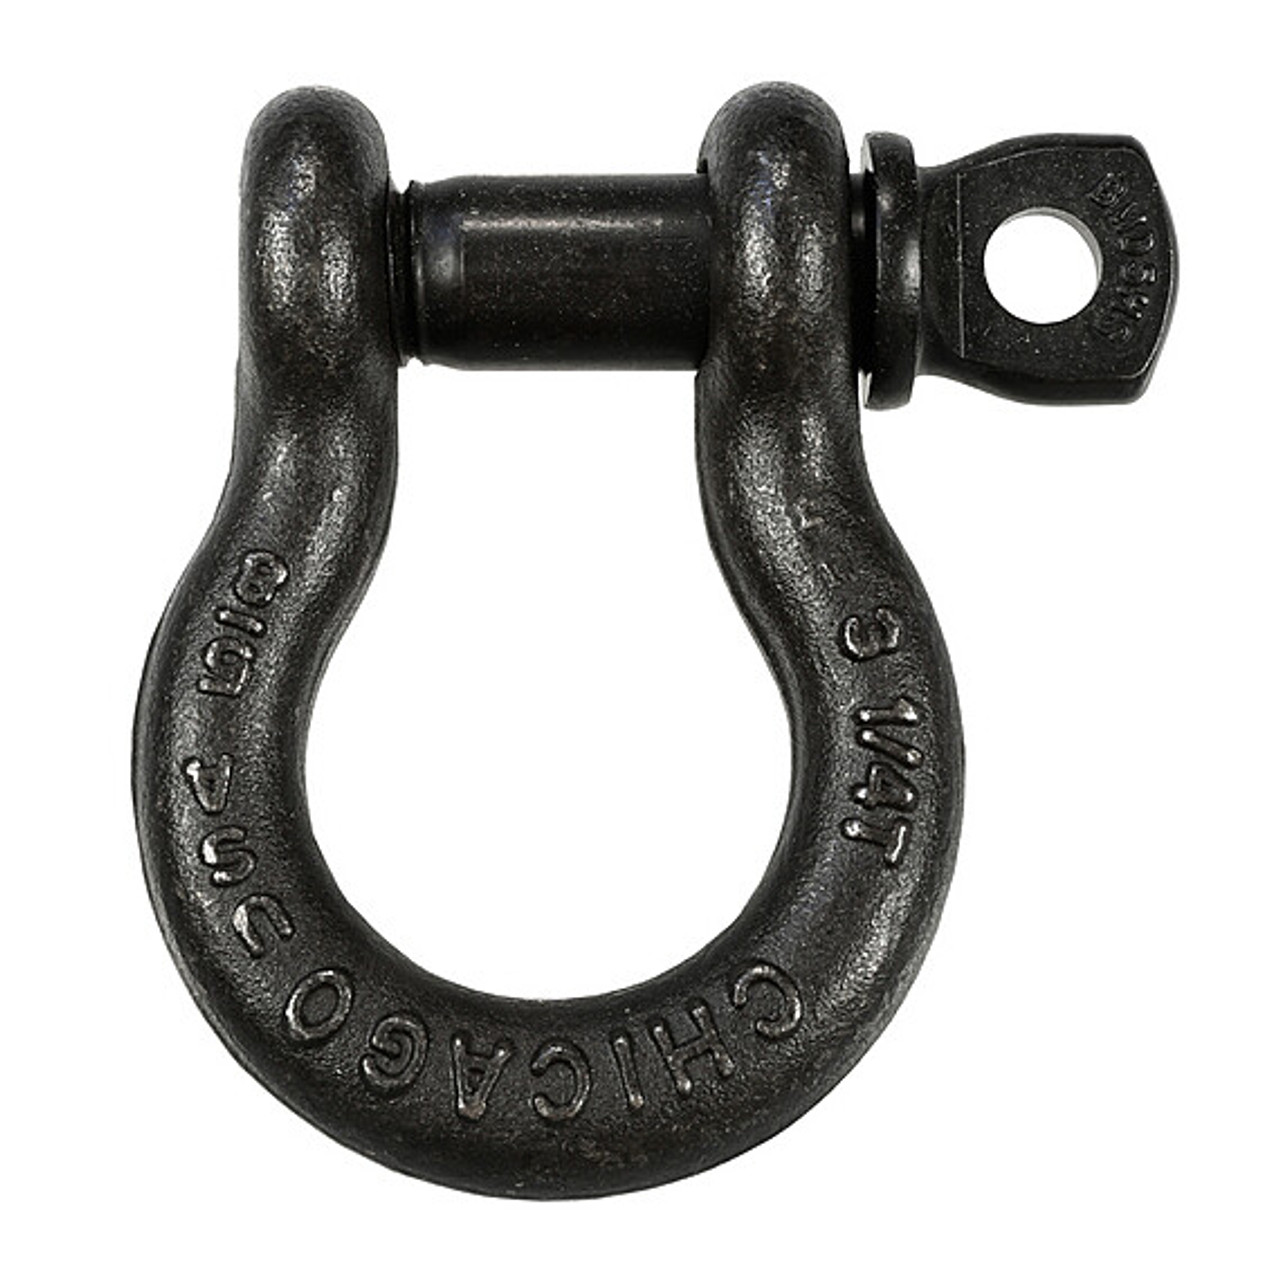 The Light Source SHACKLE 5/8 Screw Pin Shackle 5/8"